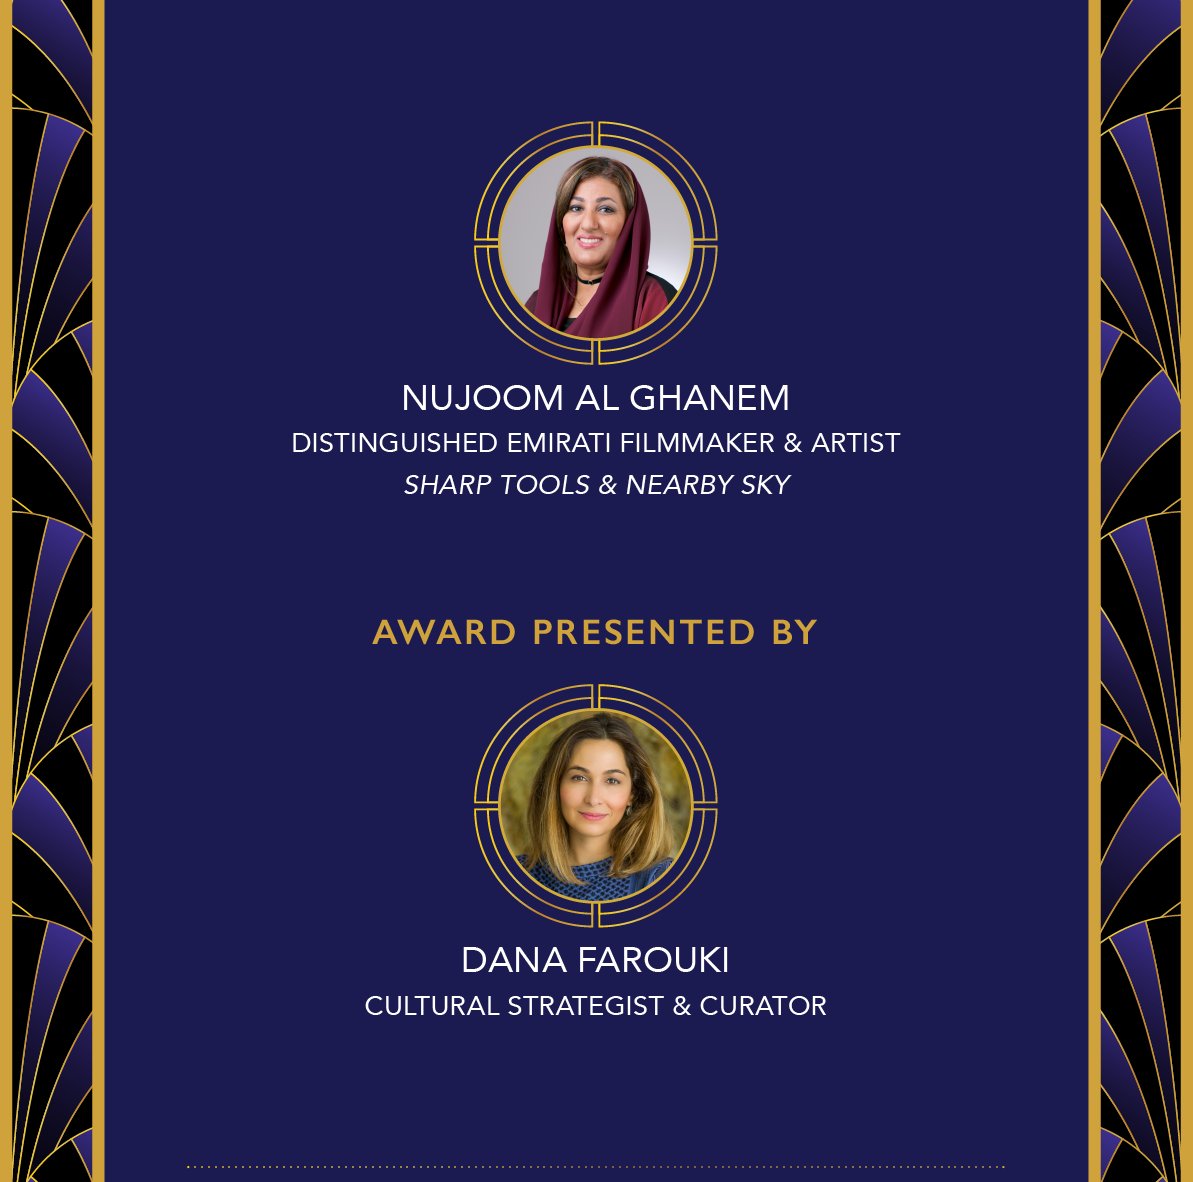 Join us for 11th Annual AAM Awards Dinner on Feb 28th 2024 @USIP. This year's outstanding honorees are @sallyelh @NujoomAlghanem @Telfaz11 @ArianMoayed